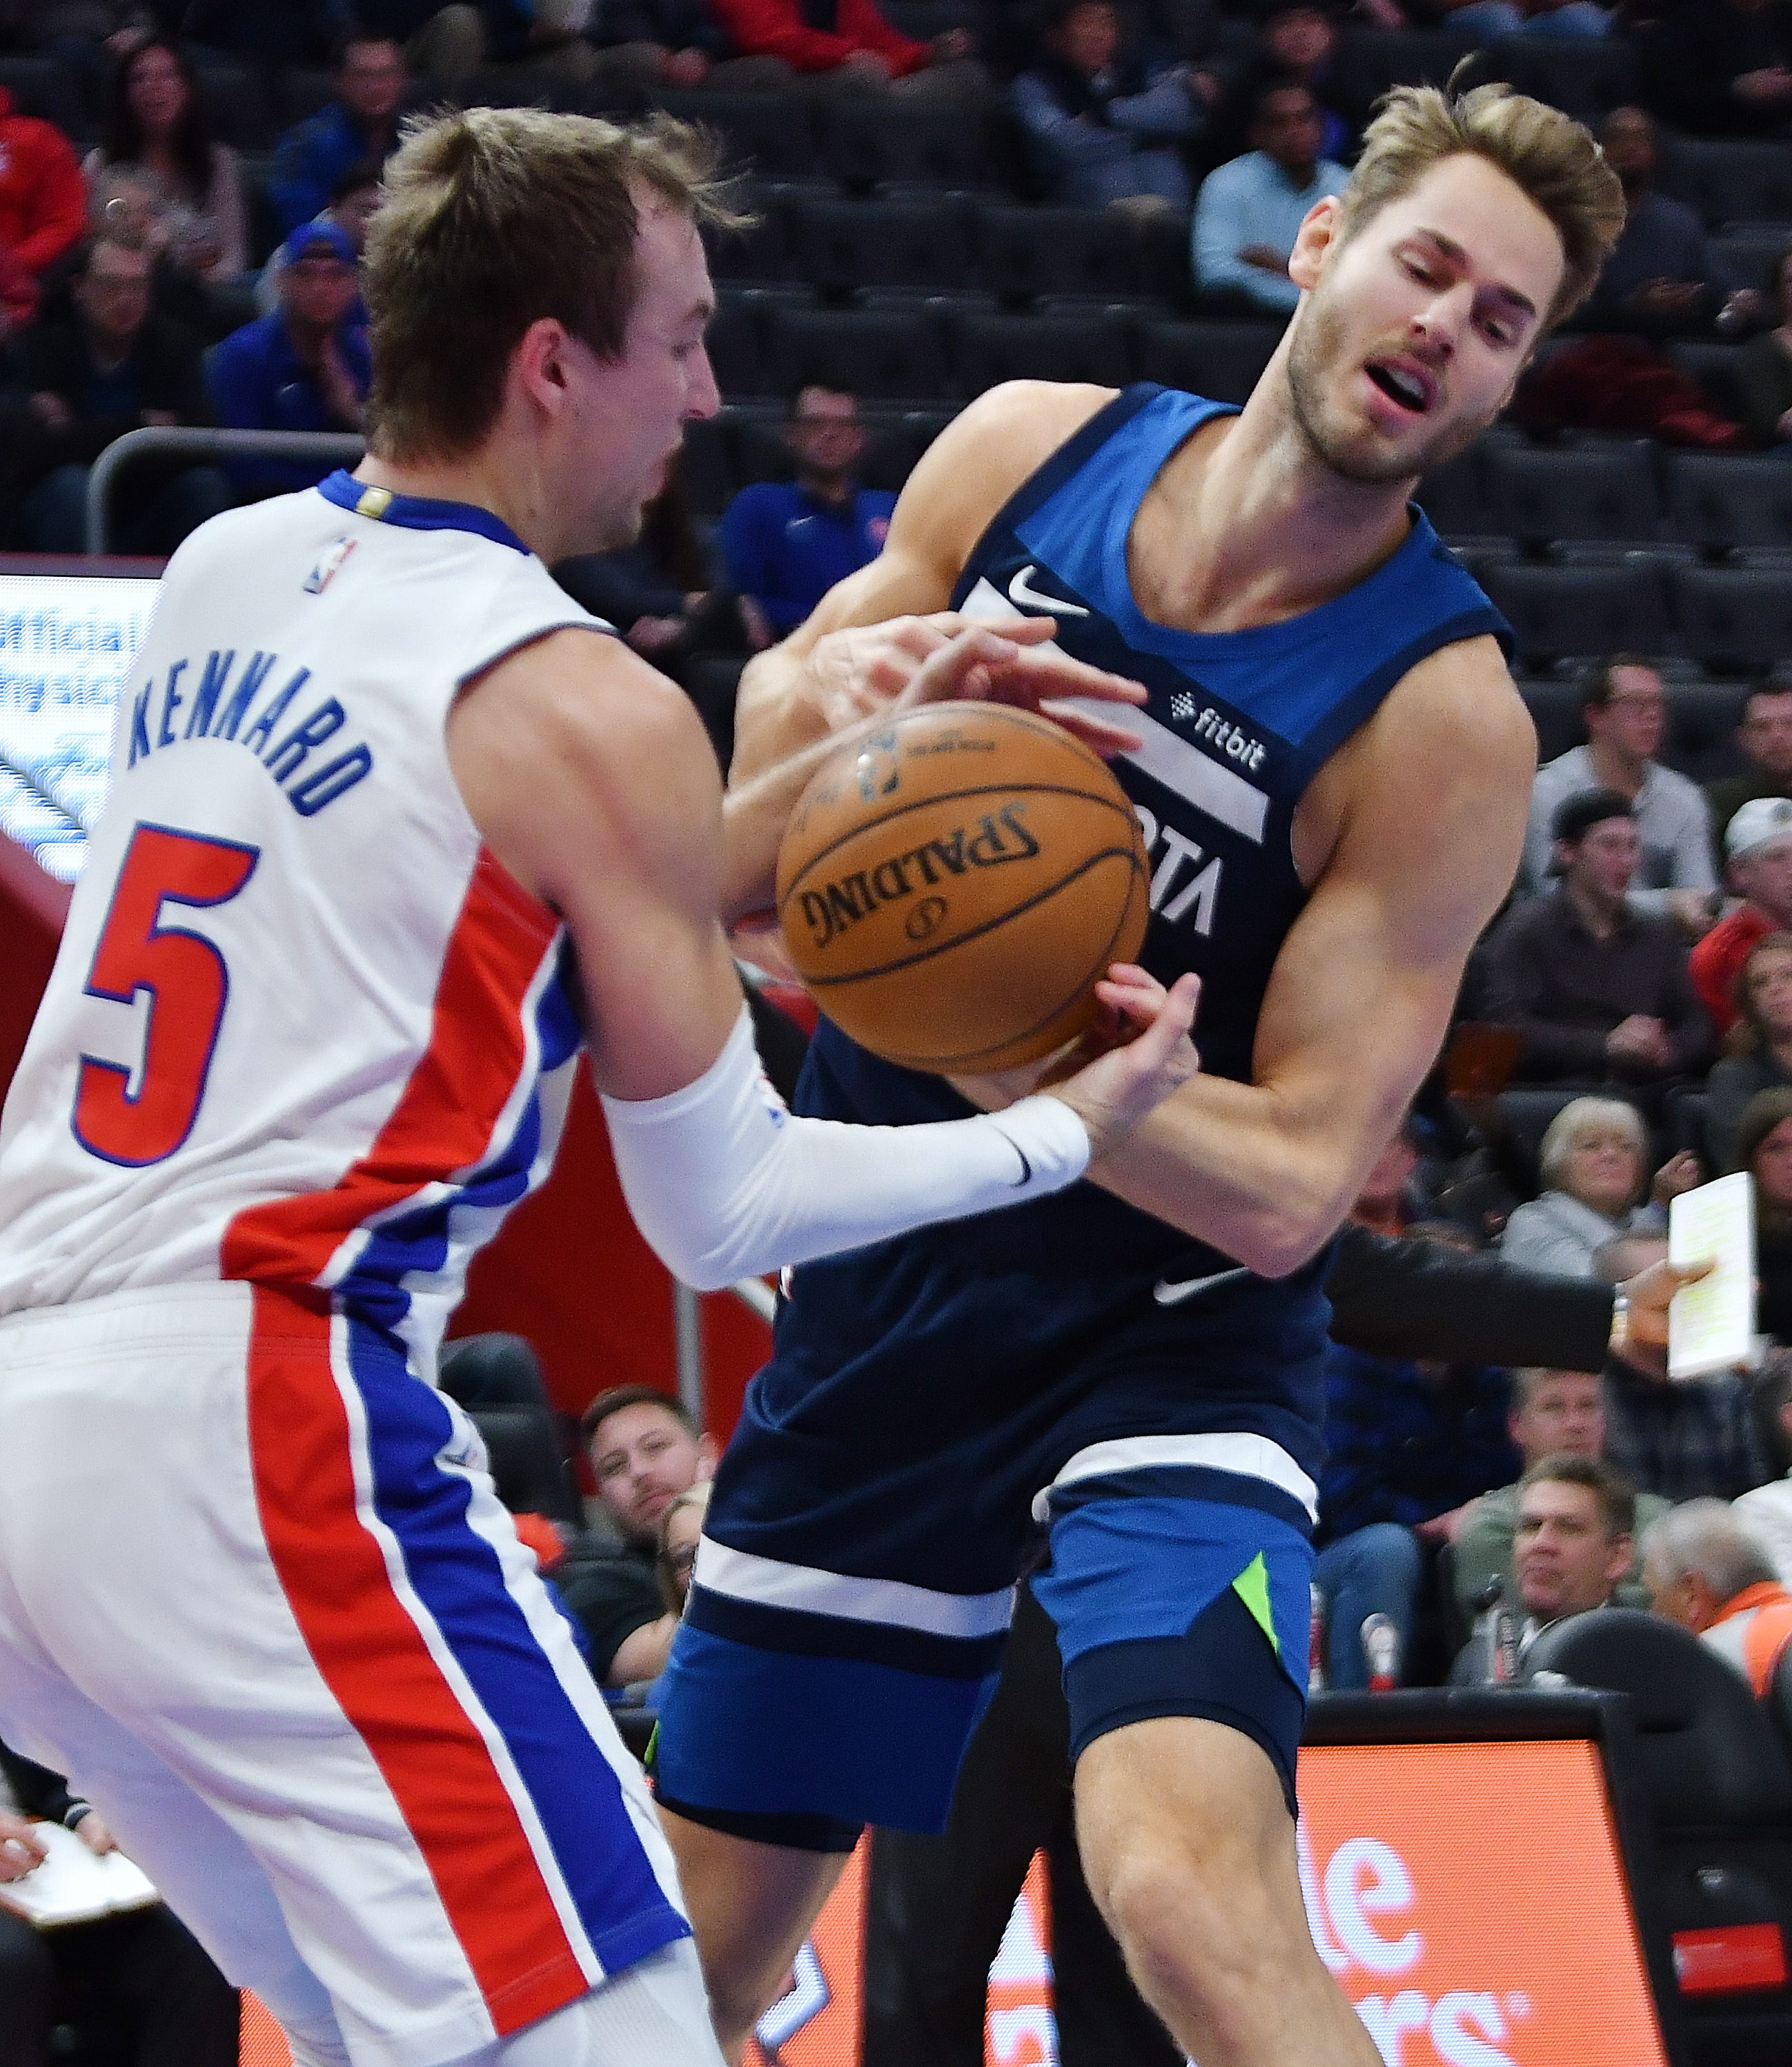 Pistons' Luke Kennard steals the ball from Timberwolves' Jake Layman in the fourth quarter.